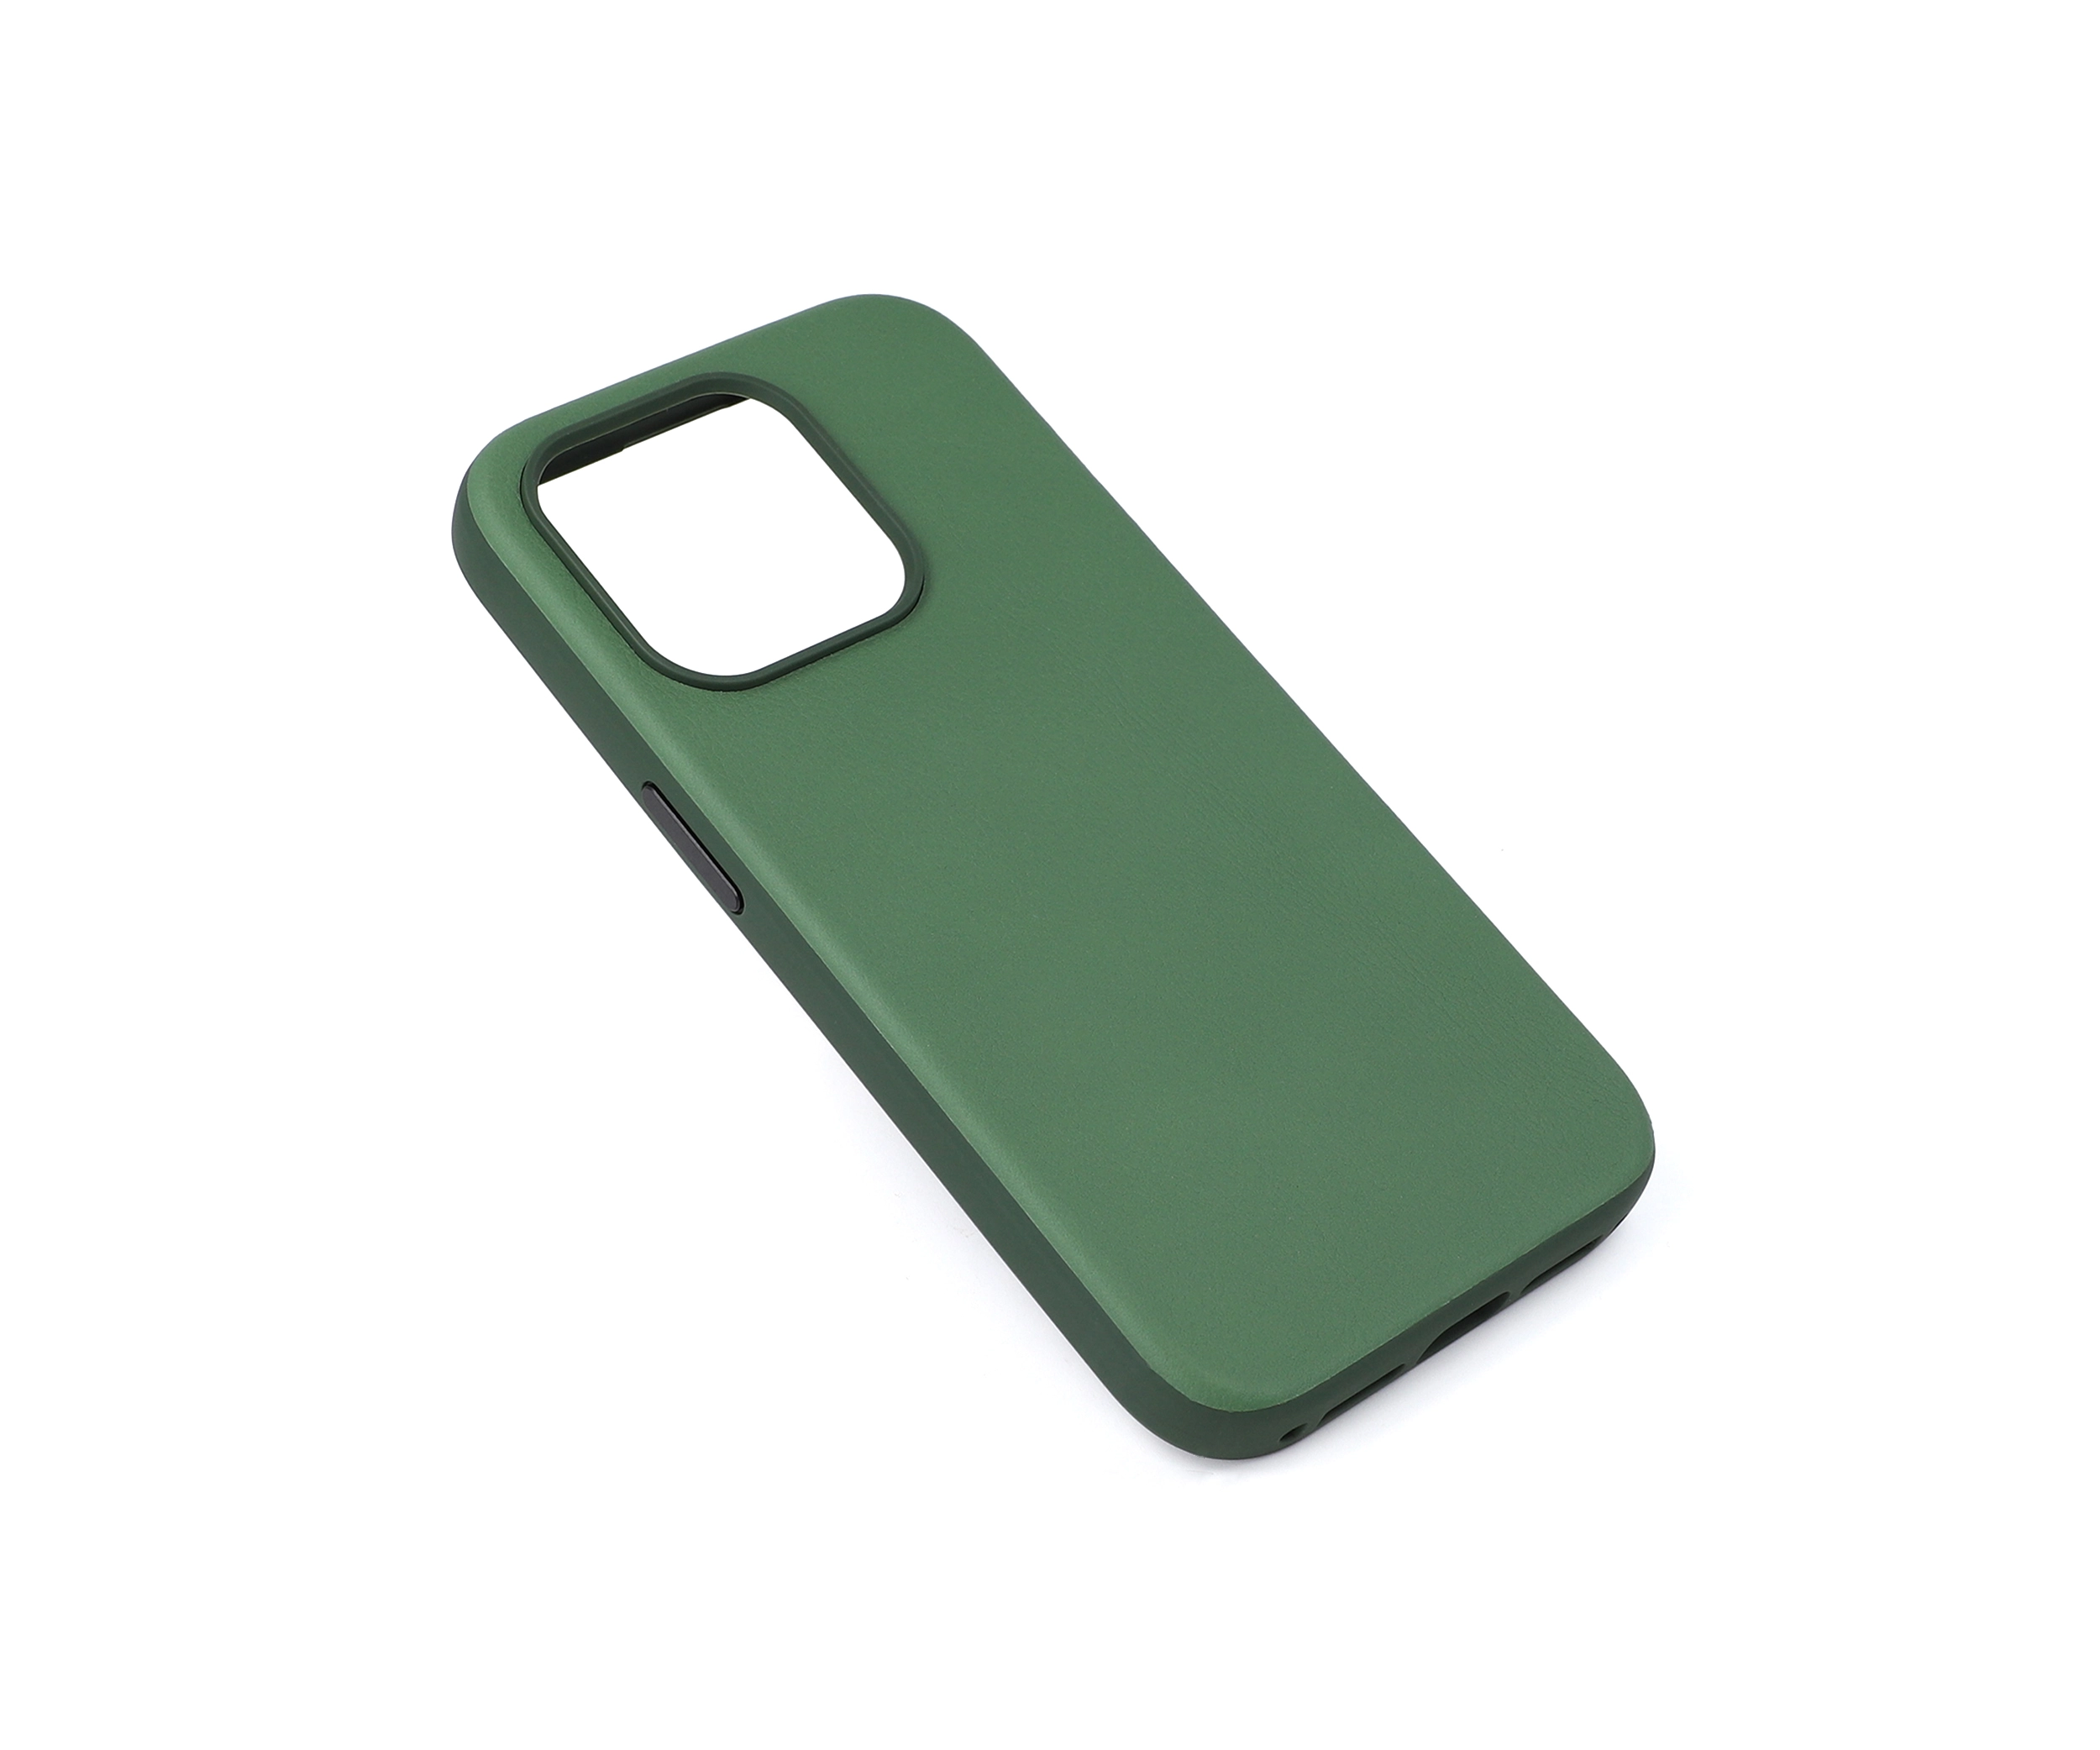 How to Take Off iPhone Case?